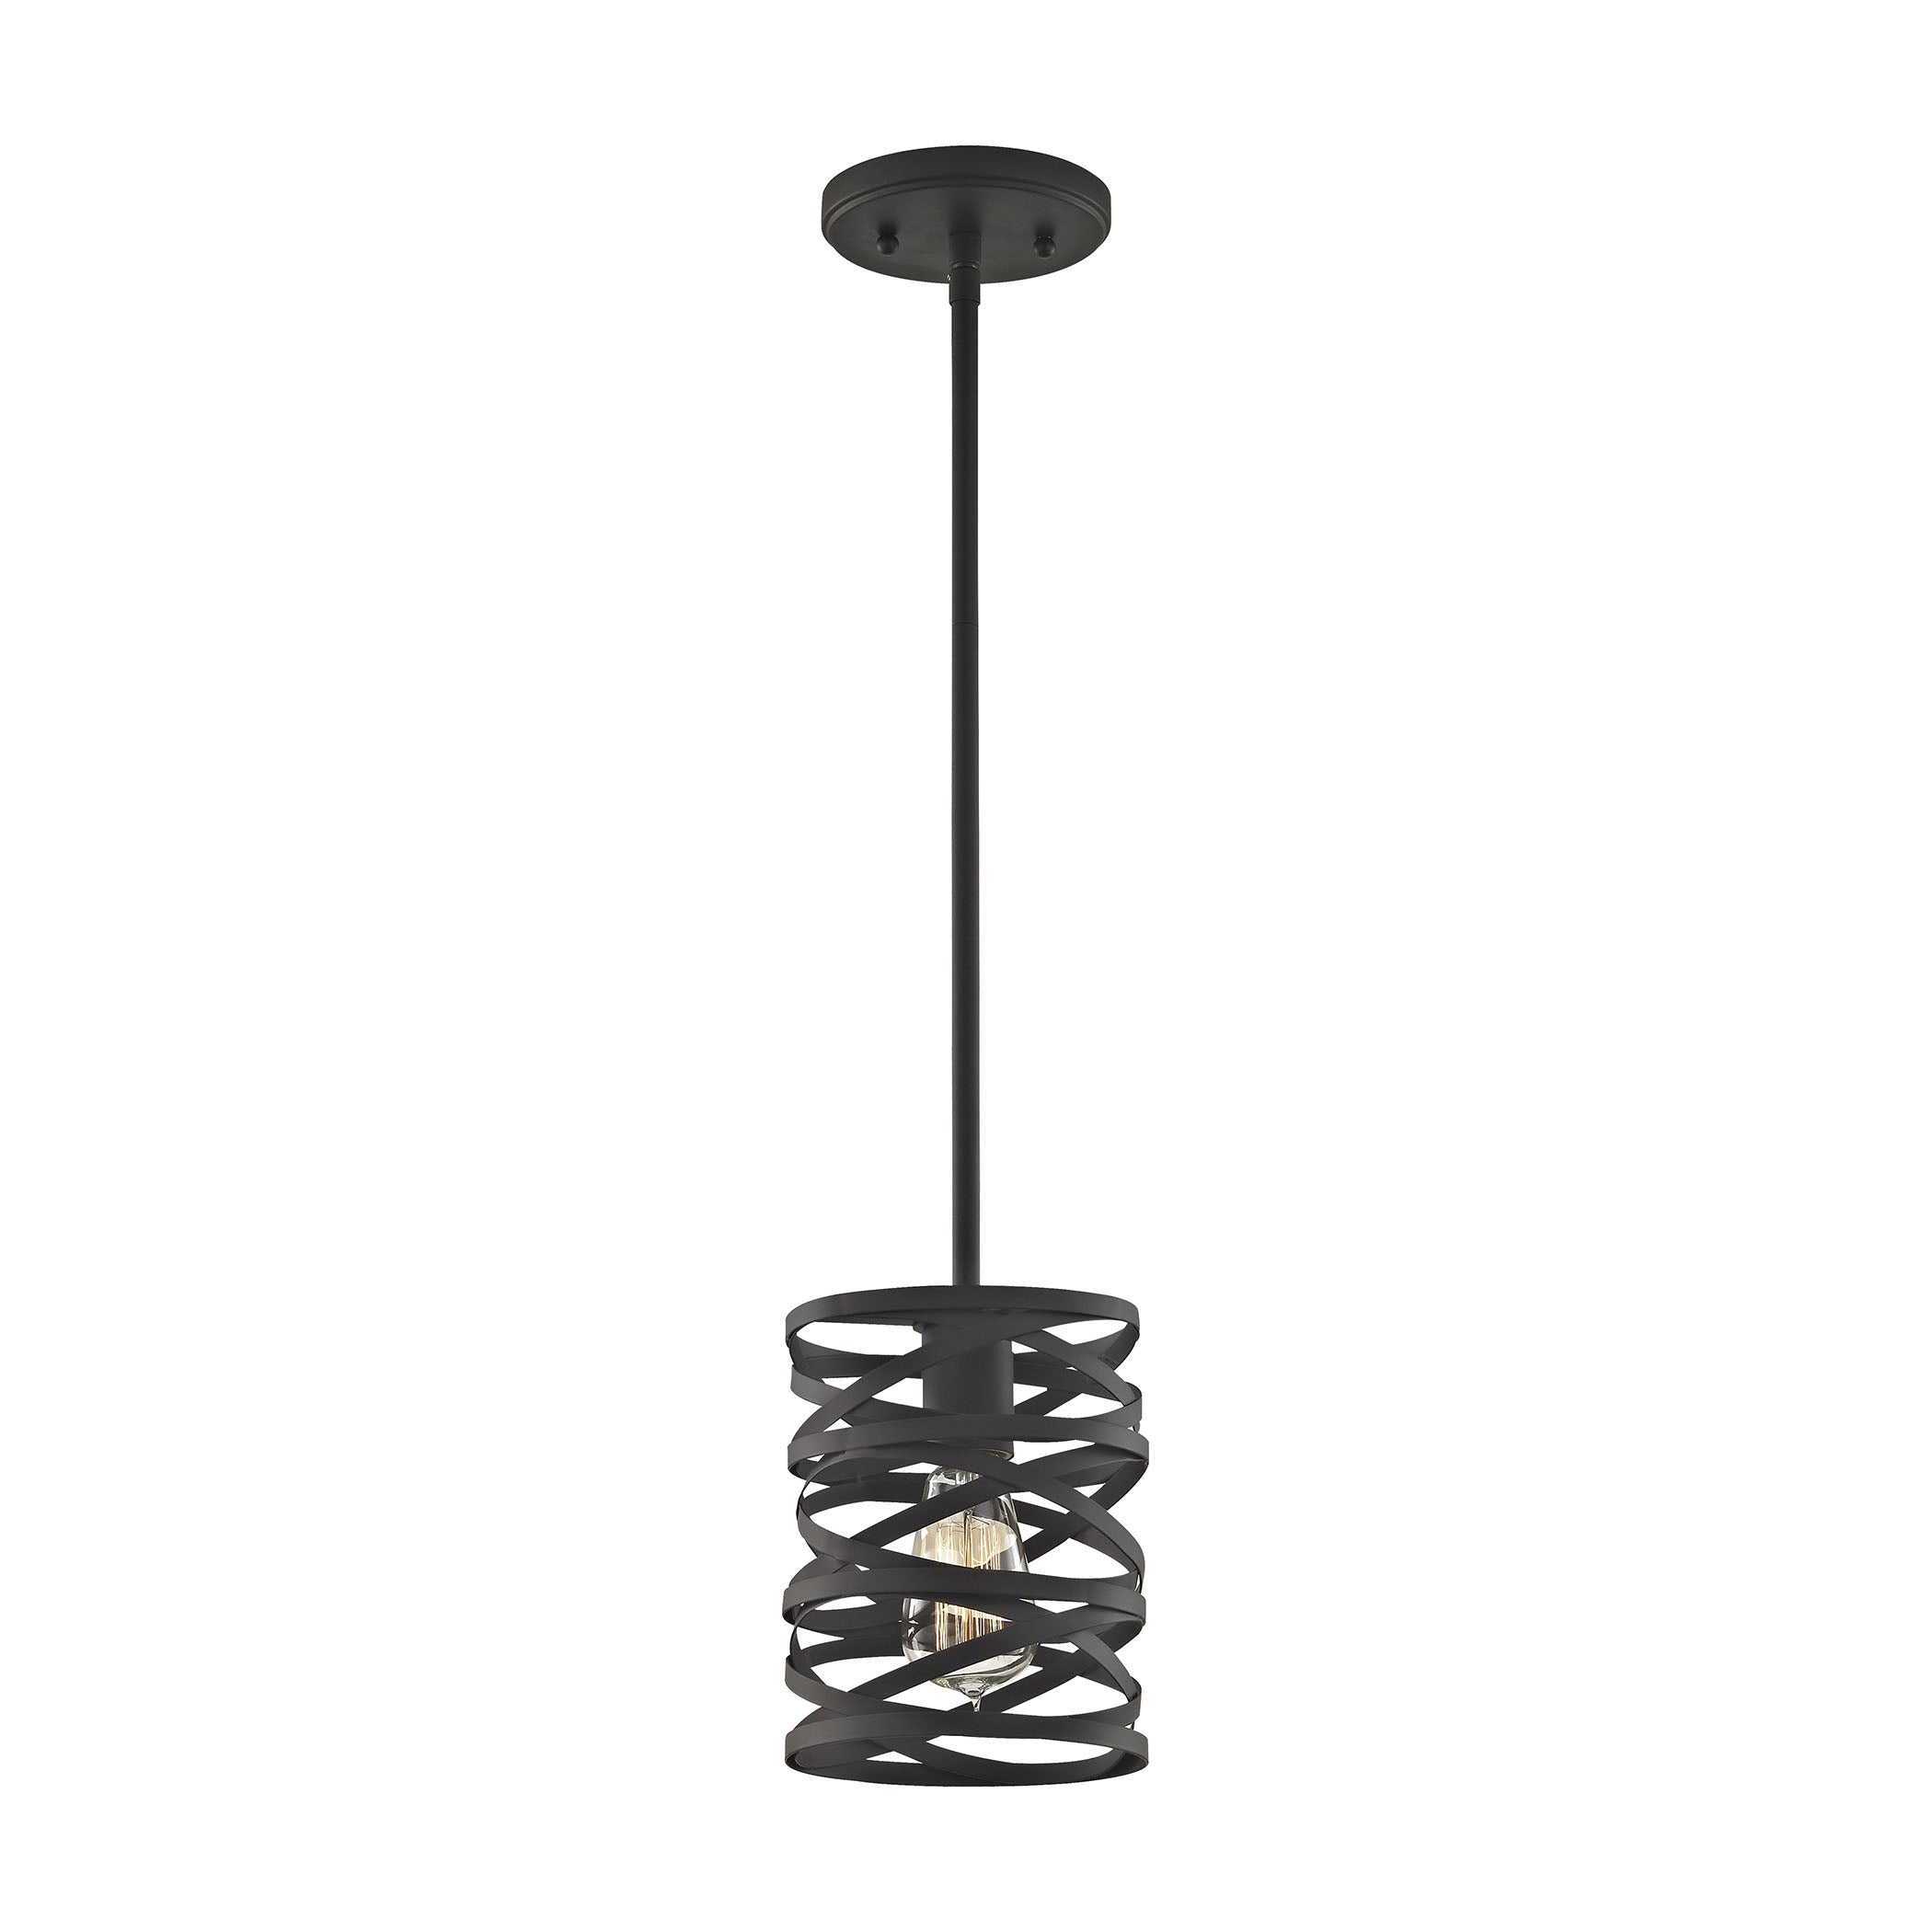 ELK Lighting 81184/1-LA Vorticy 1-Light Mini Pendant in Oil Rubbed Bronze with Metal Cage - Includes Adapter Kit